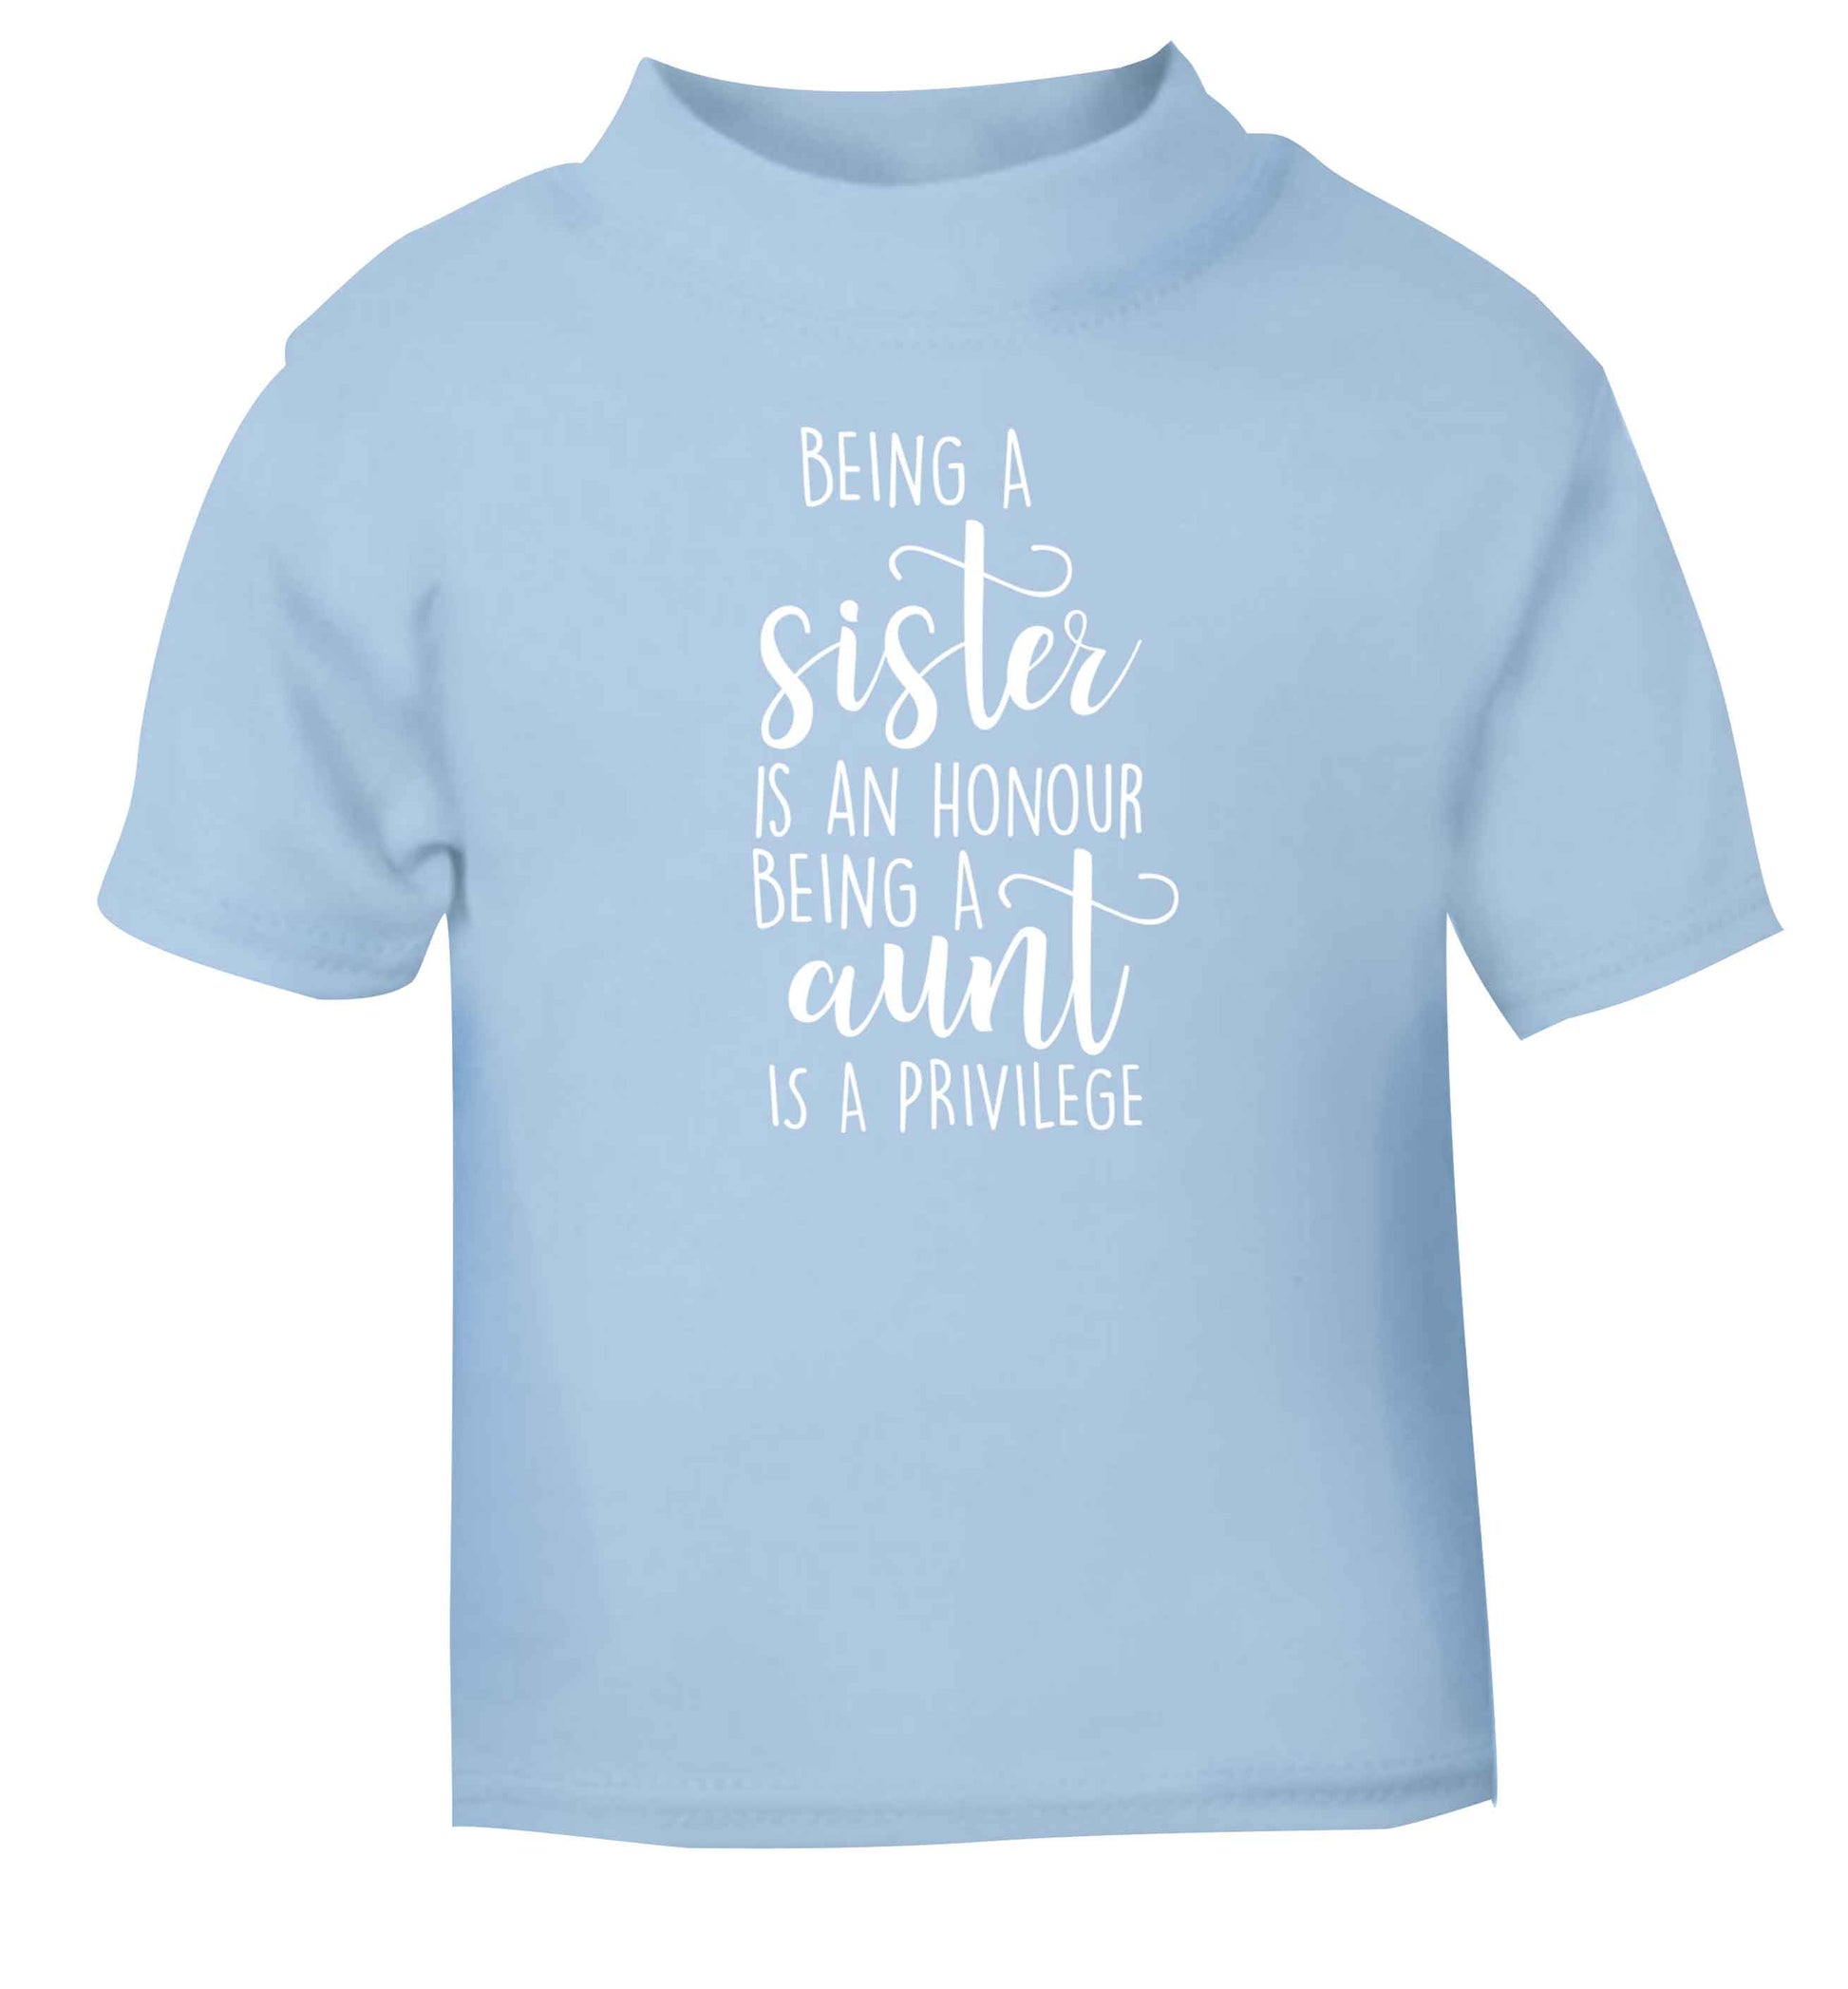 Being a sister is an honour being an auntie is a privilege light blue Baby Toddler Tshirt 2 Years